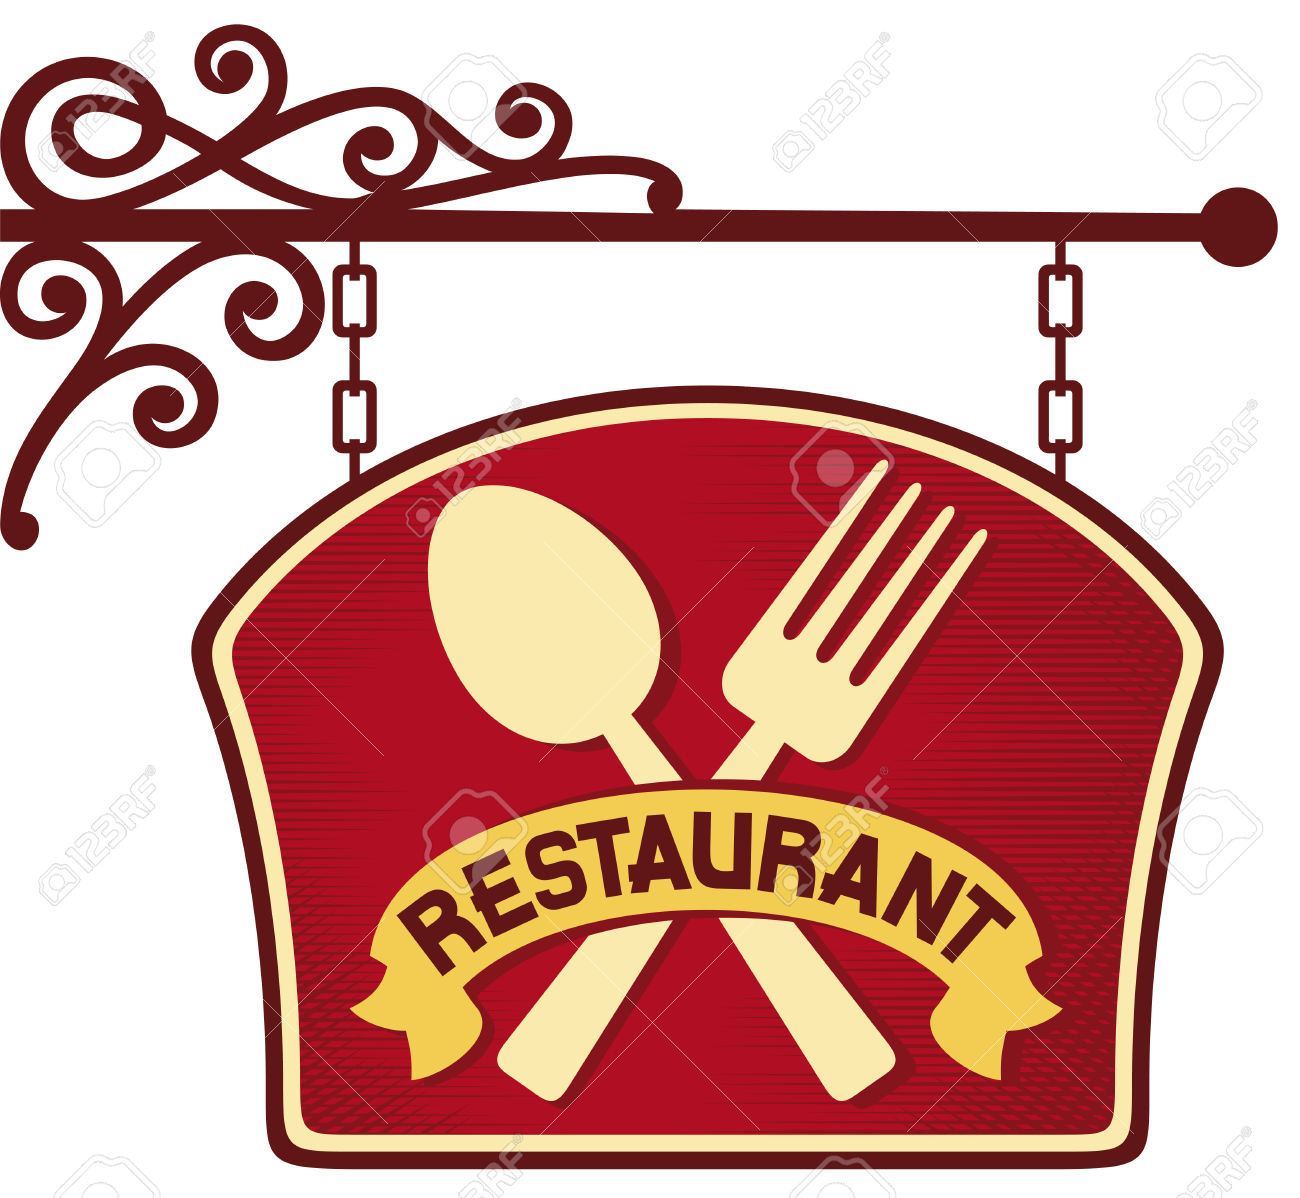 Restaurant clipart page 1